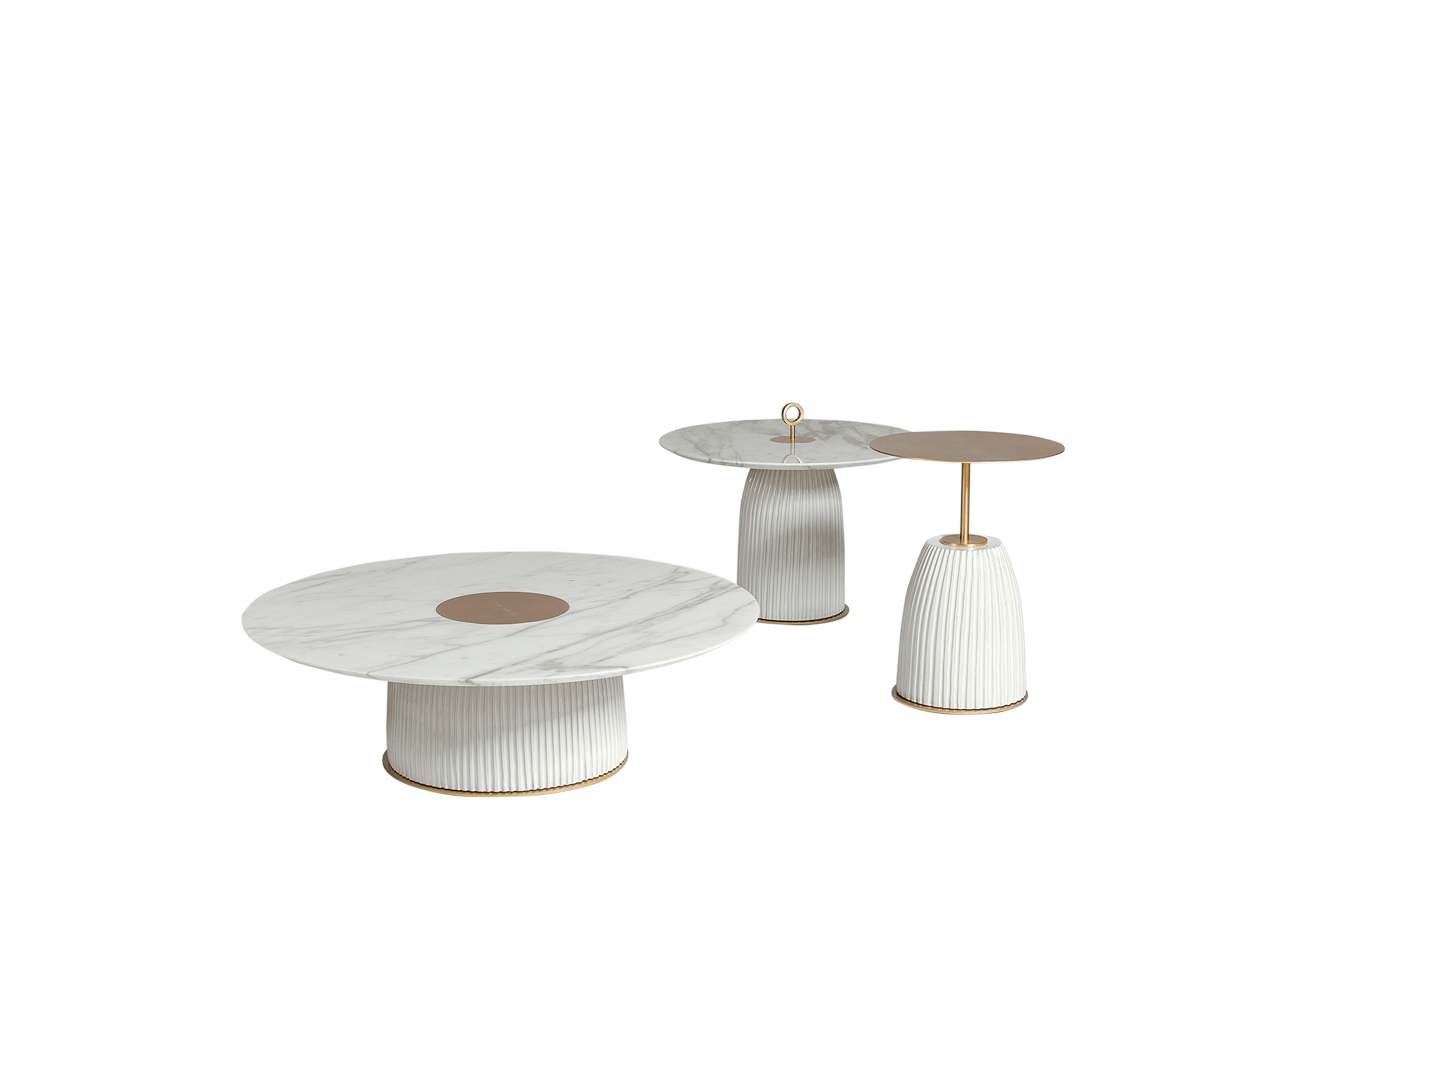 Dione coffee table